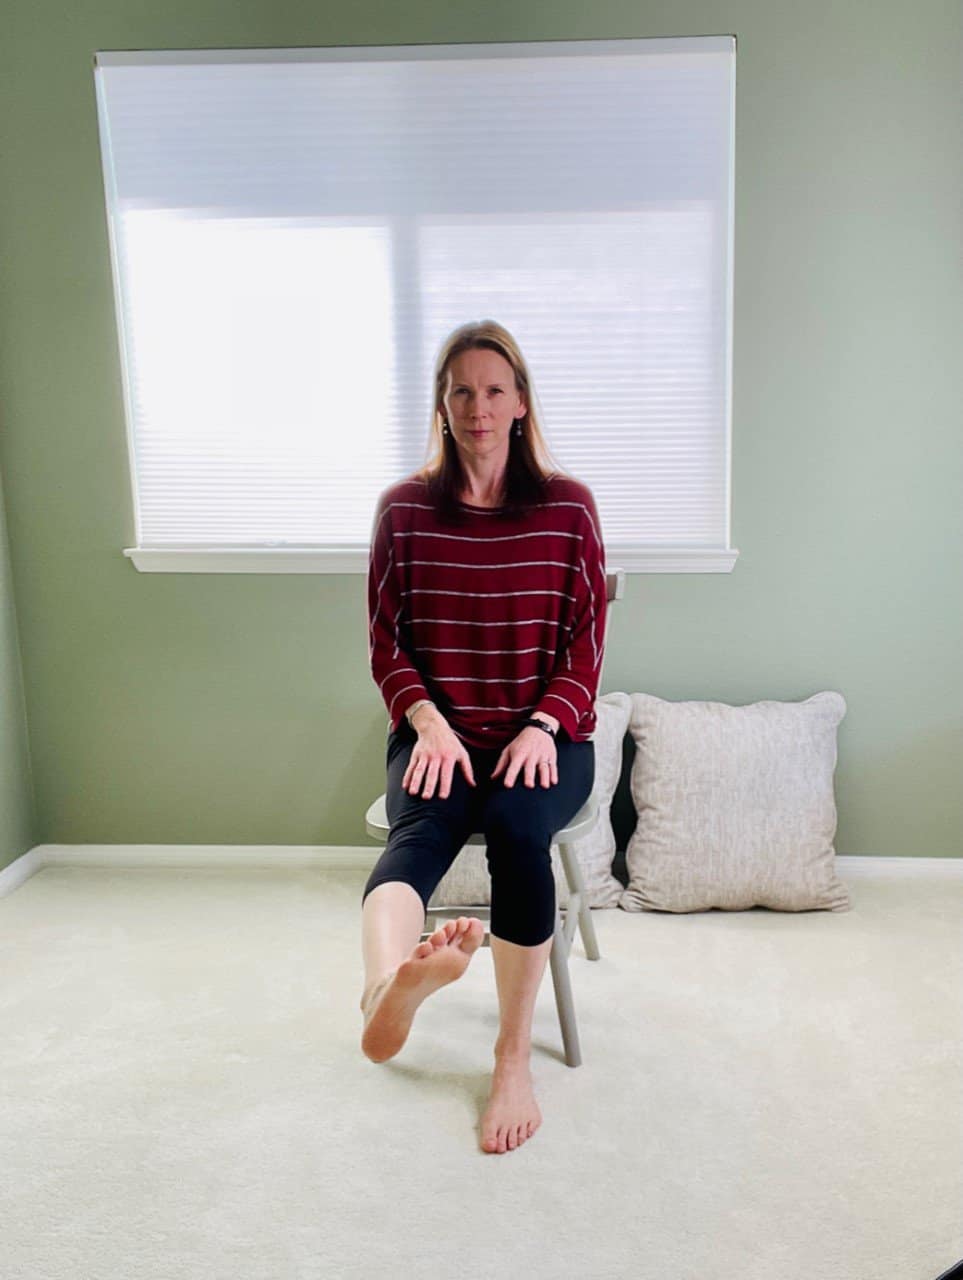 Chair Exercises: Chair Yoga For Hips - The Peaceful Chair